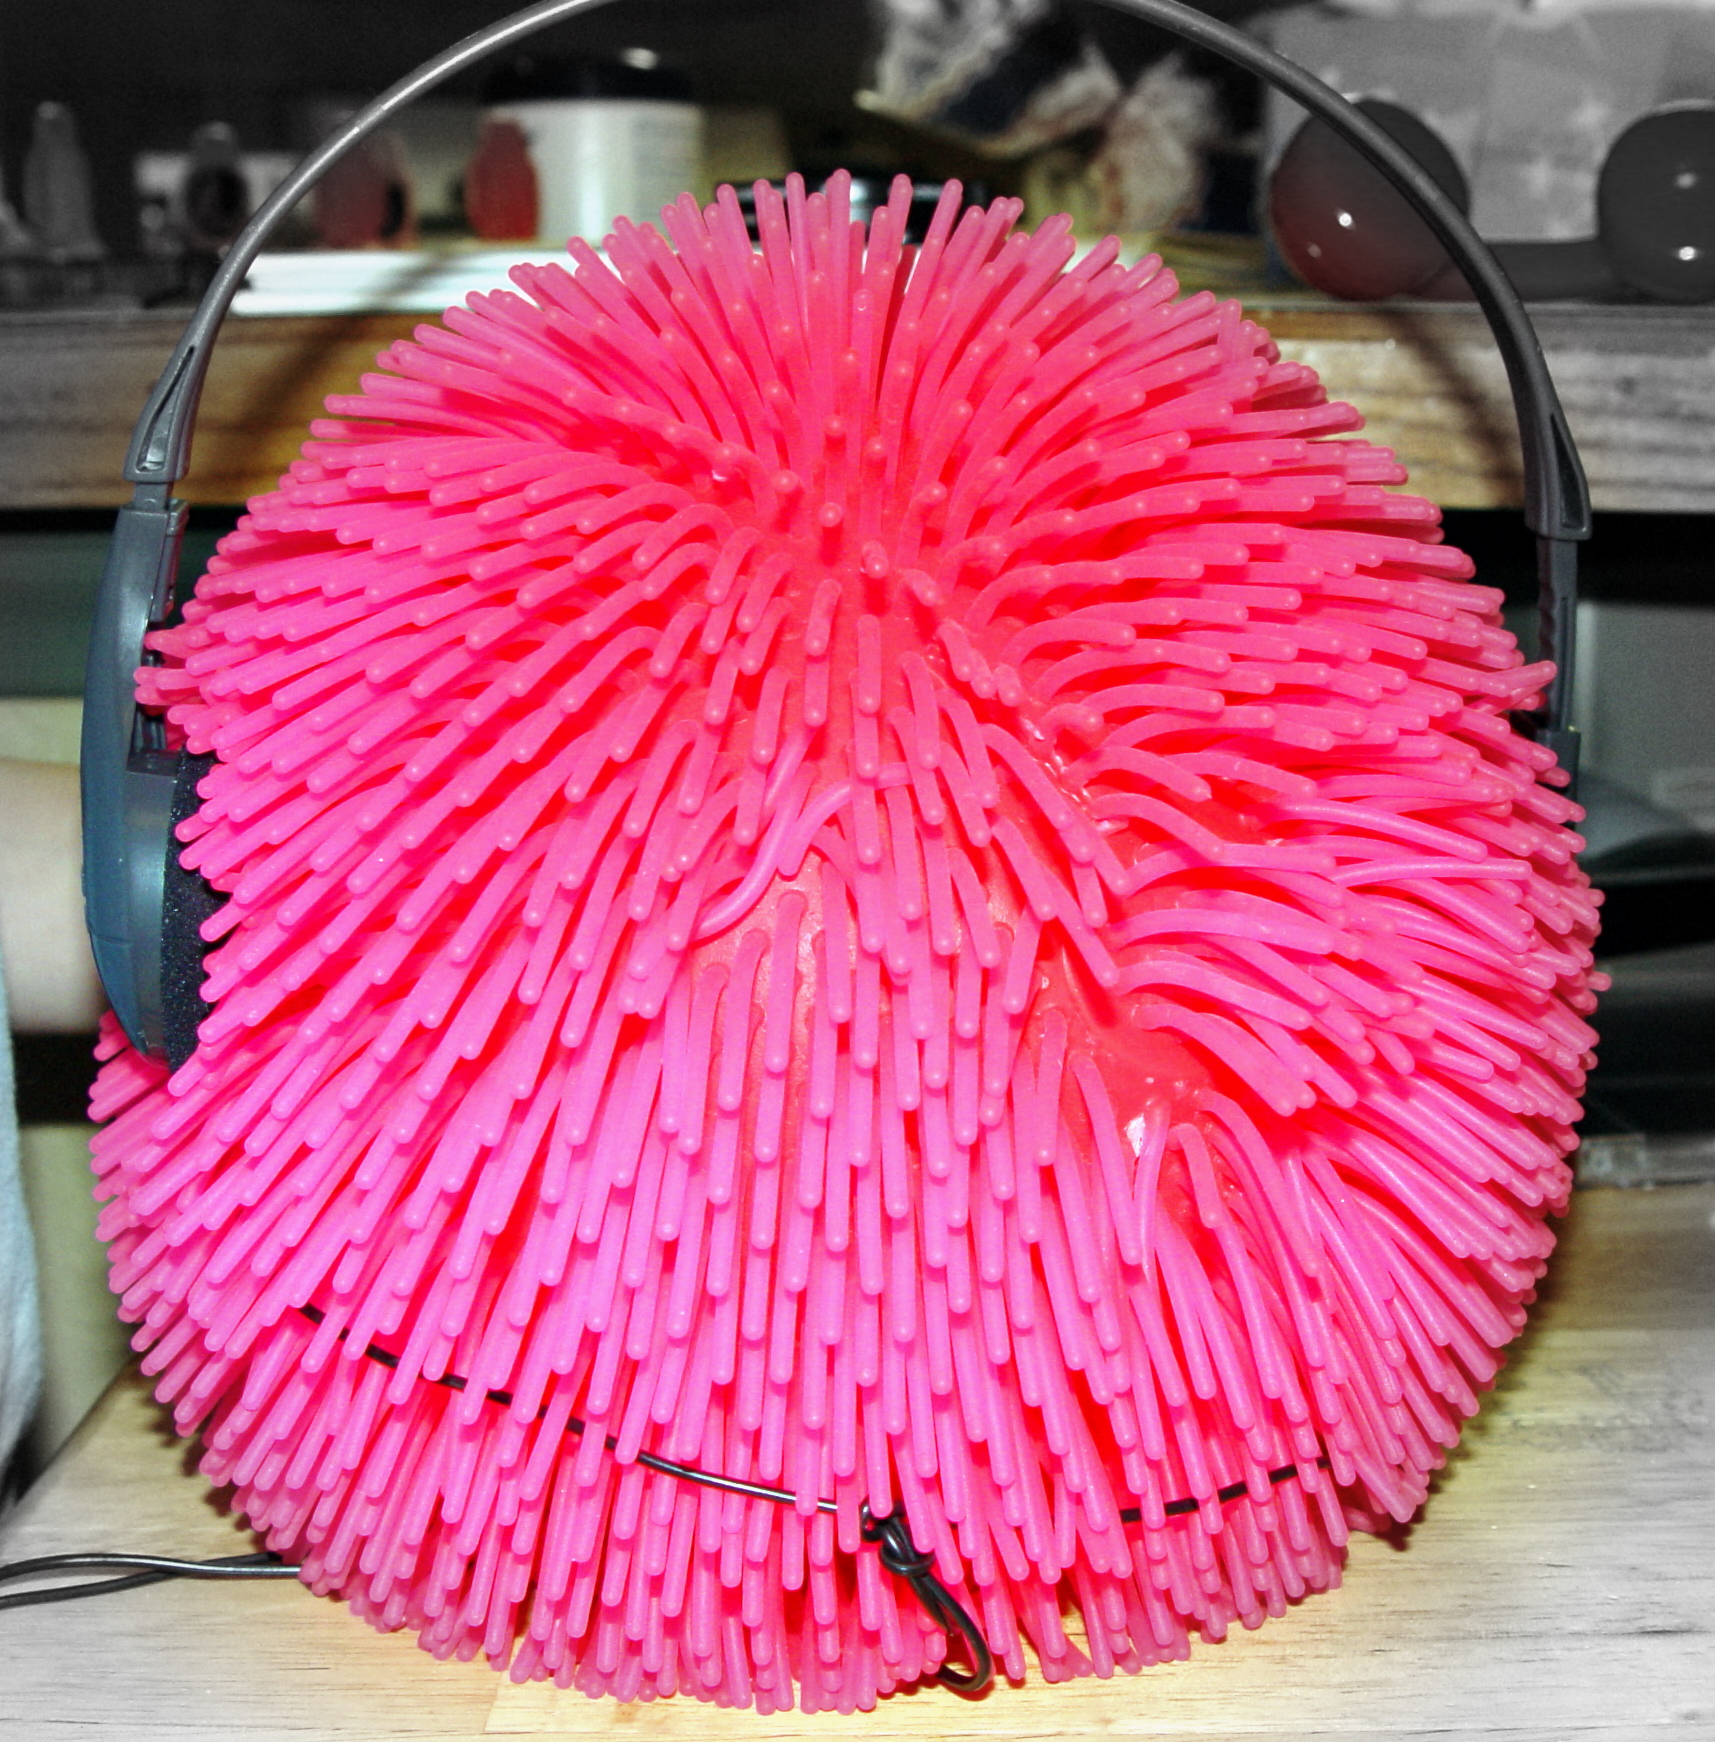 a pair of headphones laying on a piece of pink paper